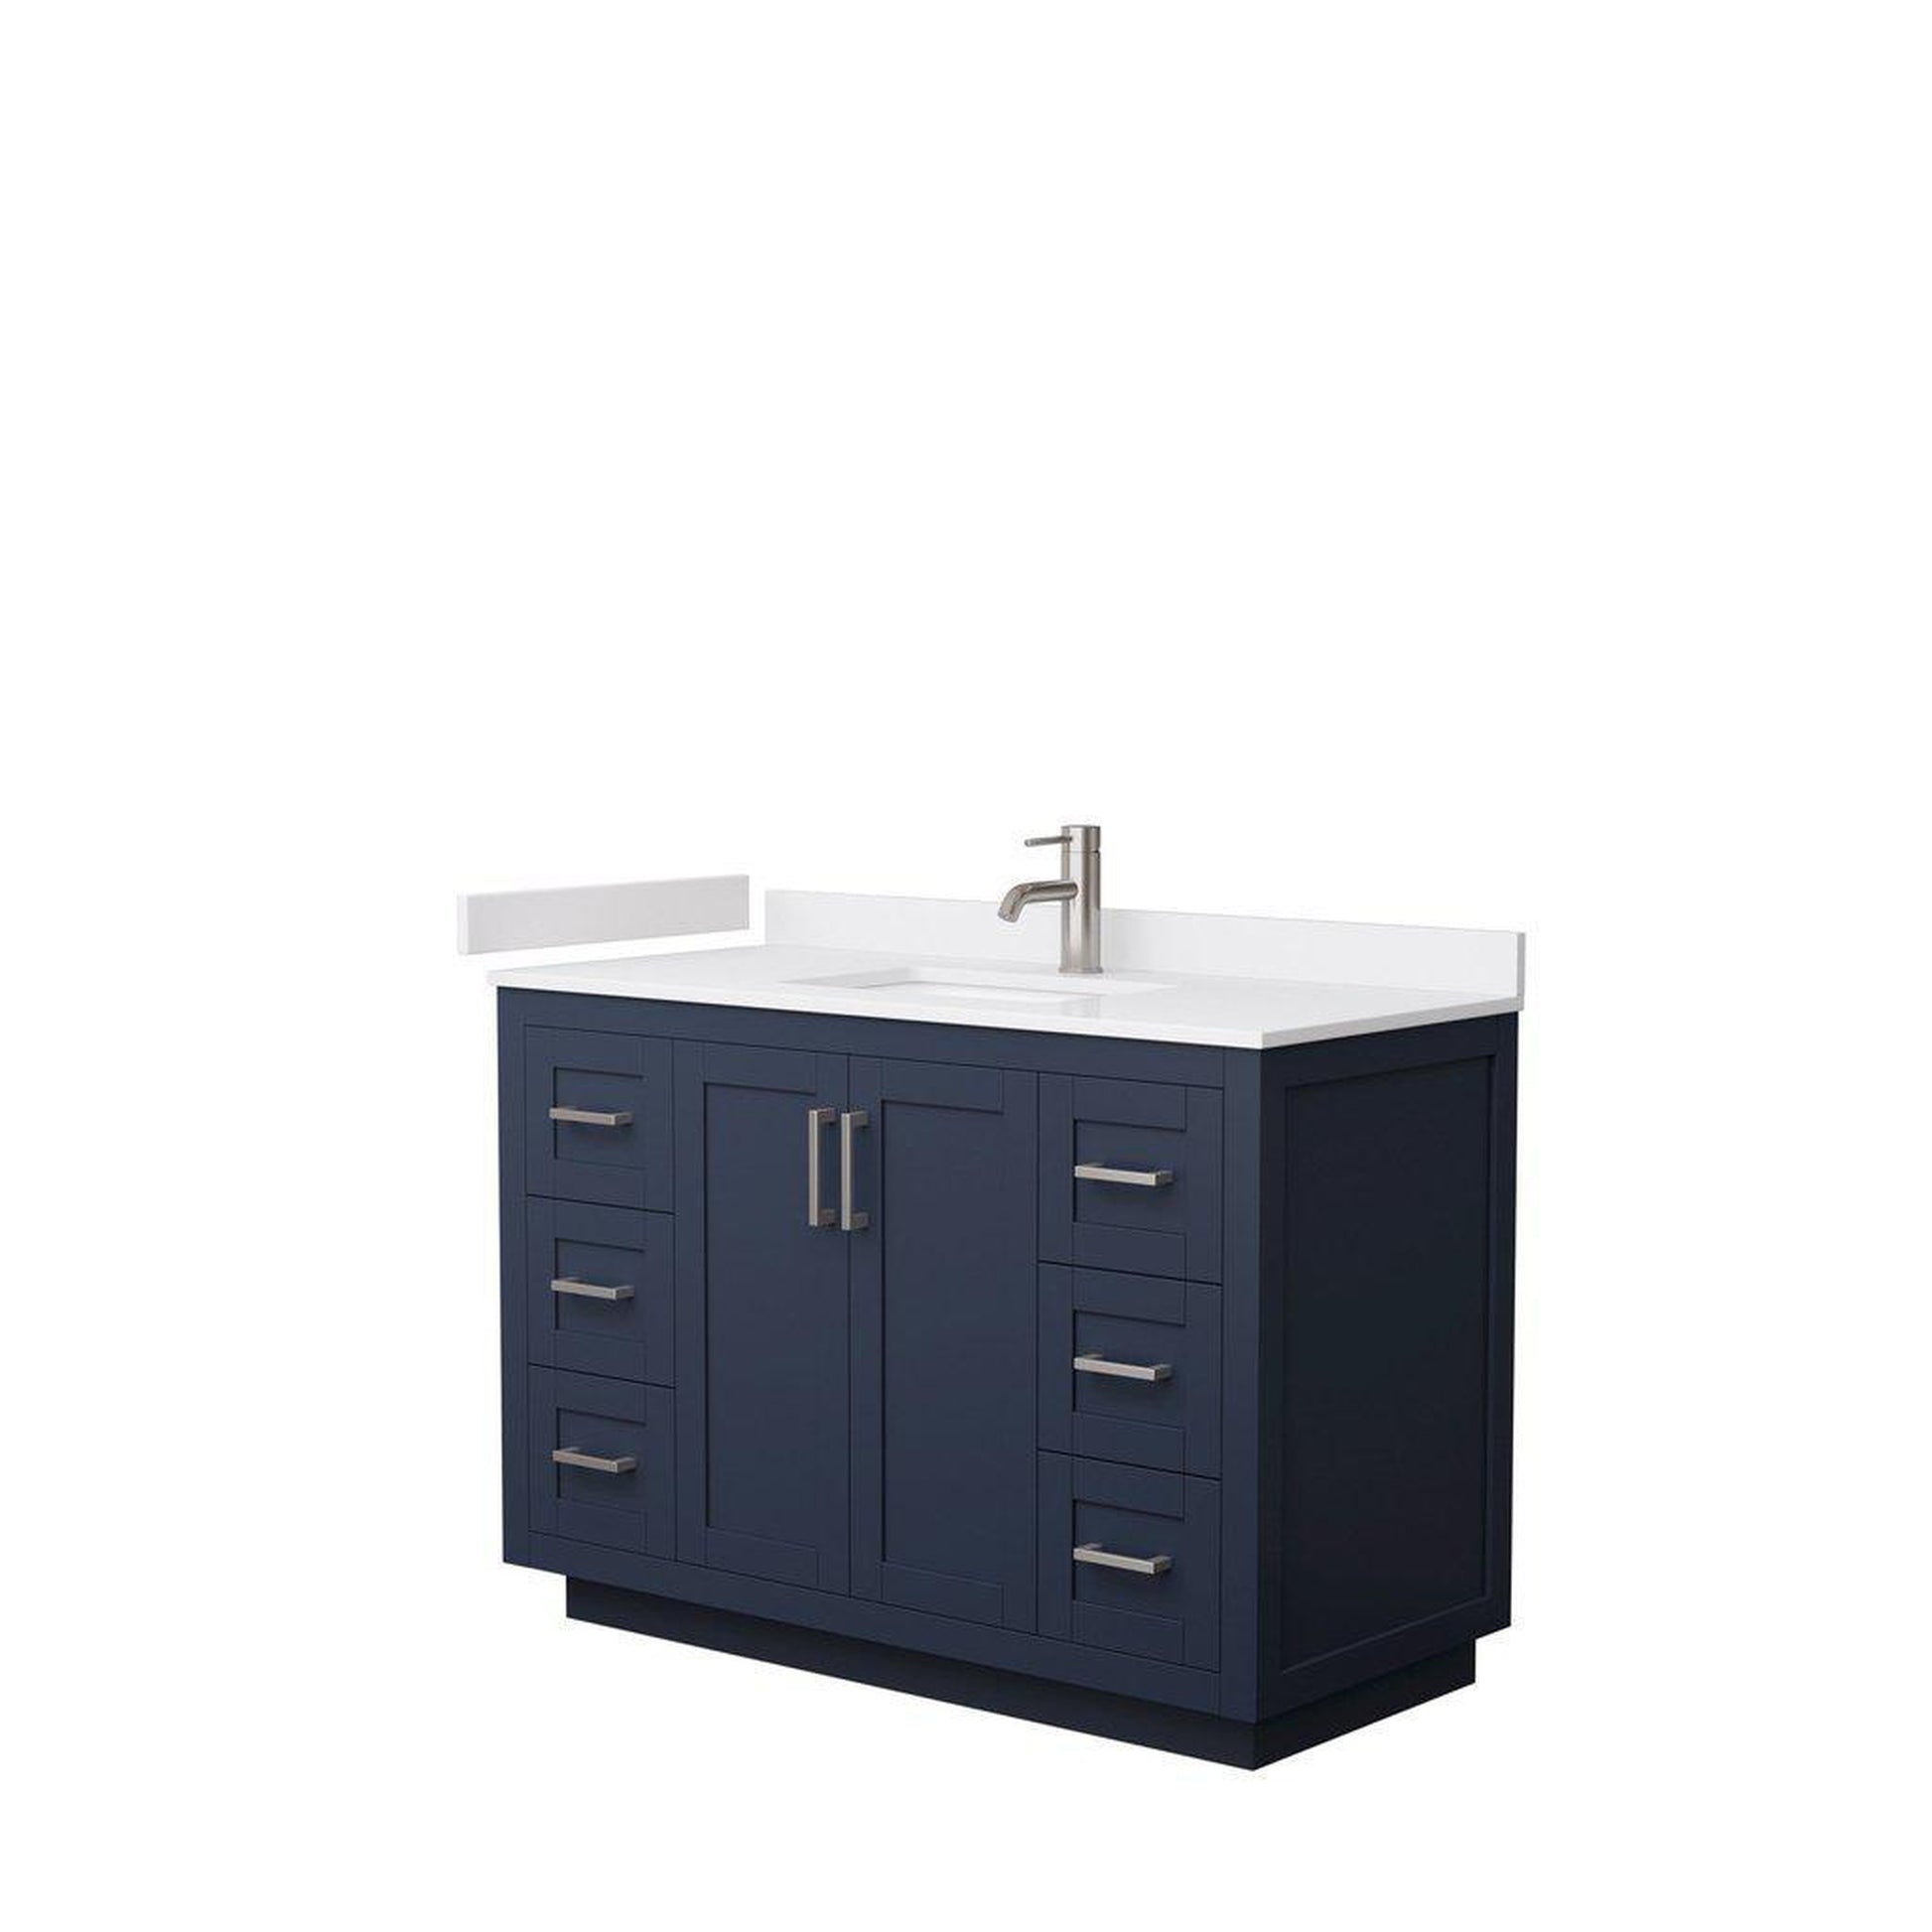 Wyndham Collection Miranda 48" Single Bathroom Dark Blue Vanity Set With White Cultured Marble Countertop, Undermount Square Sink, And Brushed Nickel Trim